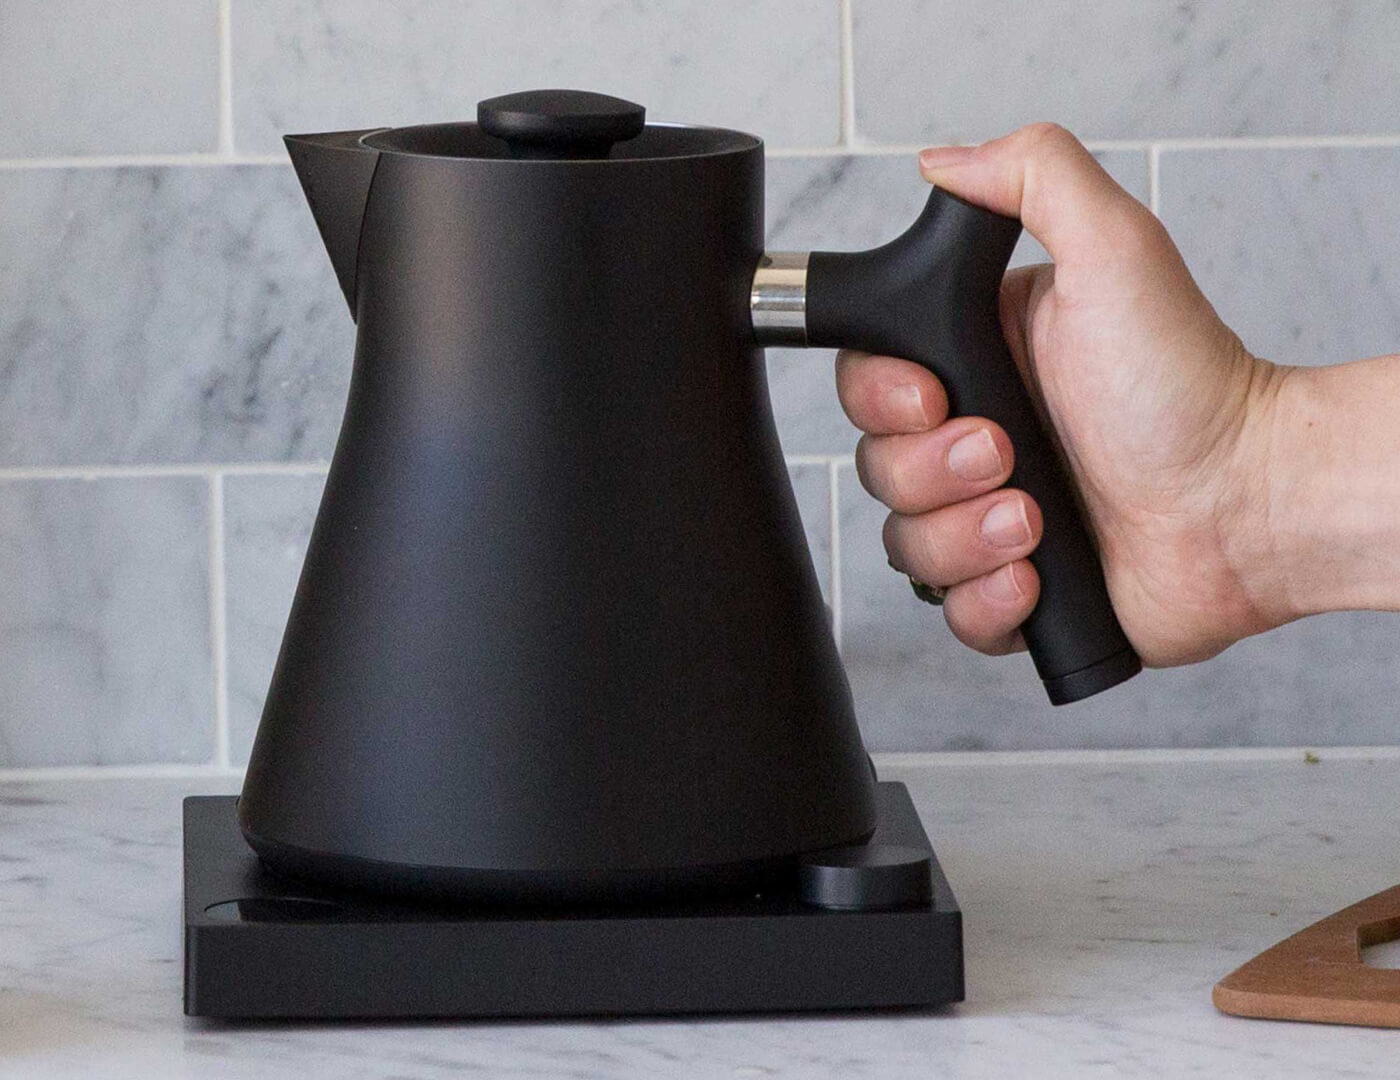 Hand on the handle of a Black Corvo Kettle EKG side view, resting on base.